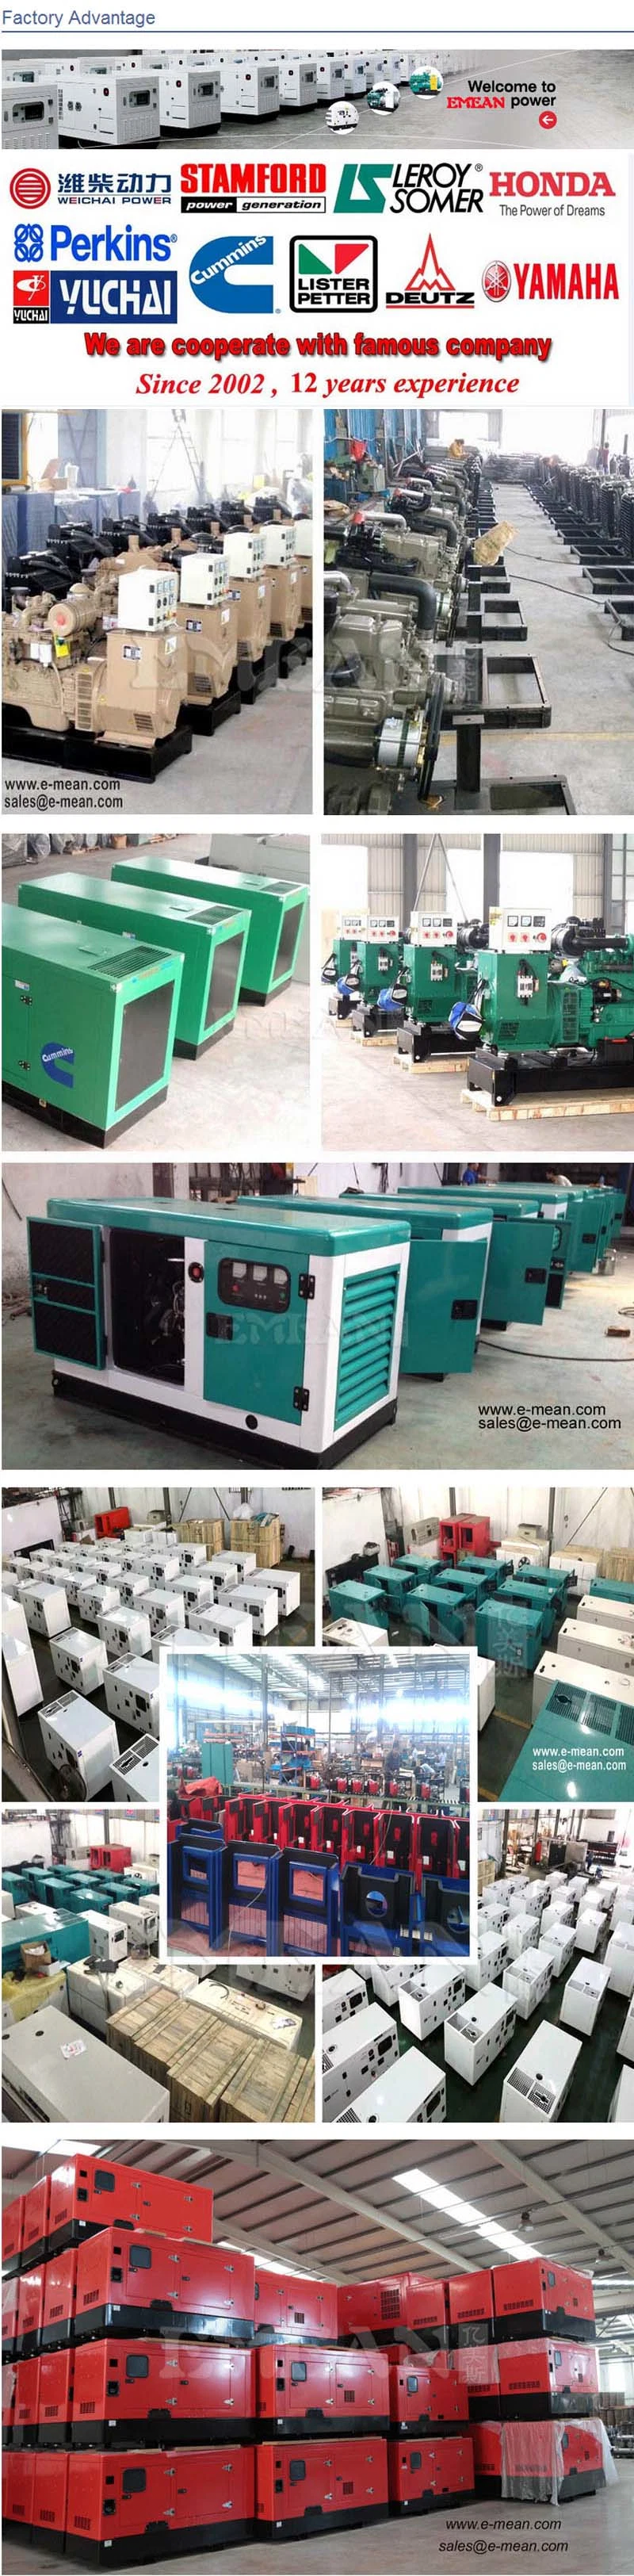 80kw Silent Diesel Generator with World Famous Engine Perkins